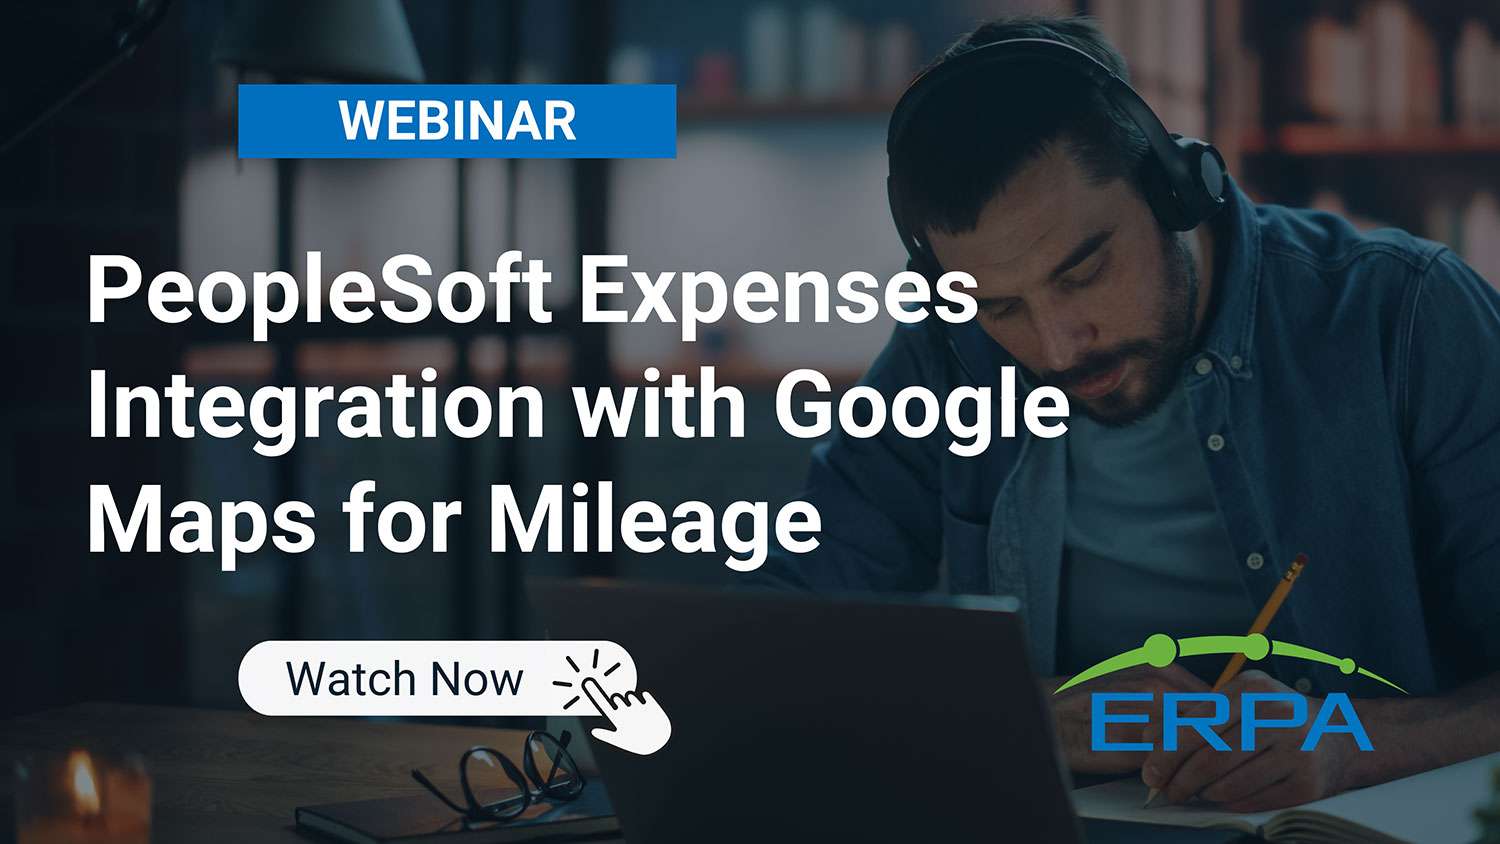 ERPA Webinar PeopleSoft Expenses Integration with Google Maps for Mileage